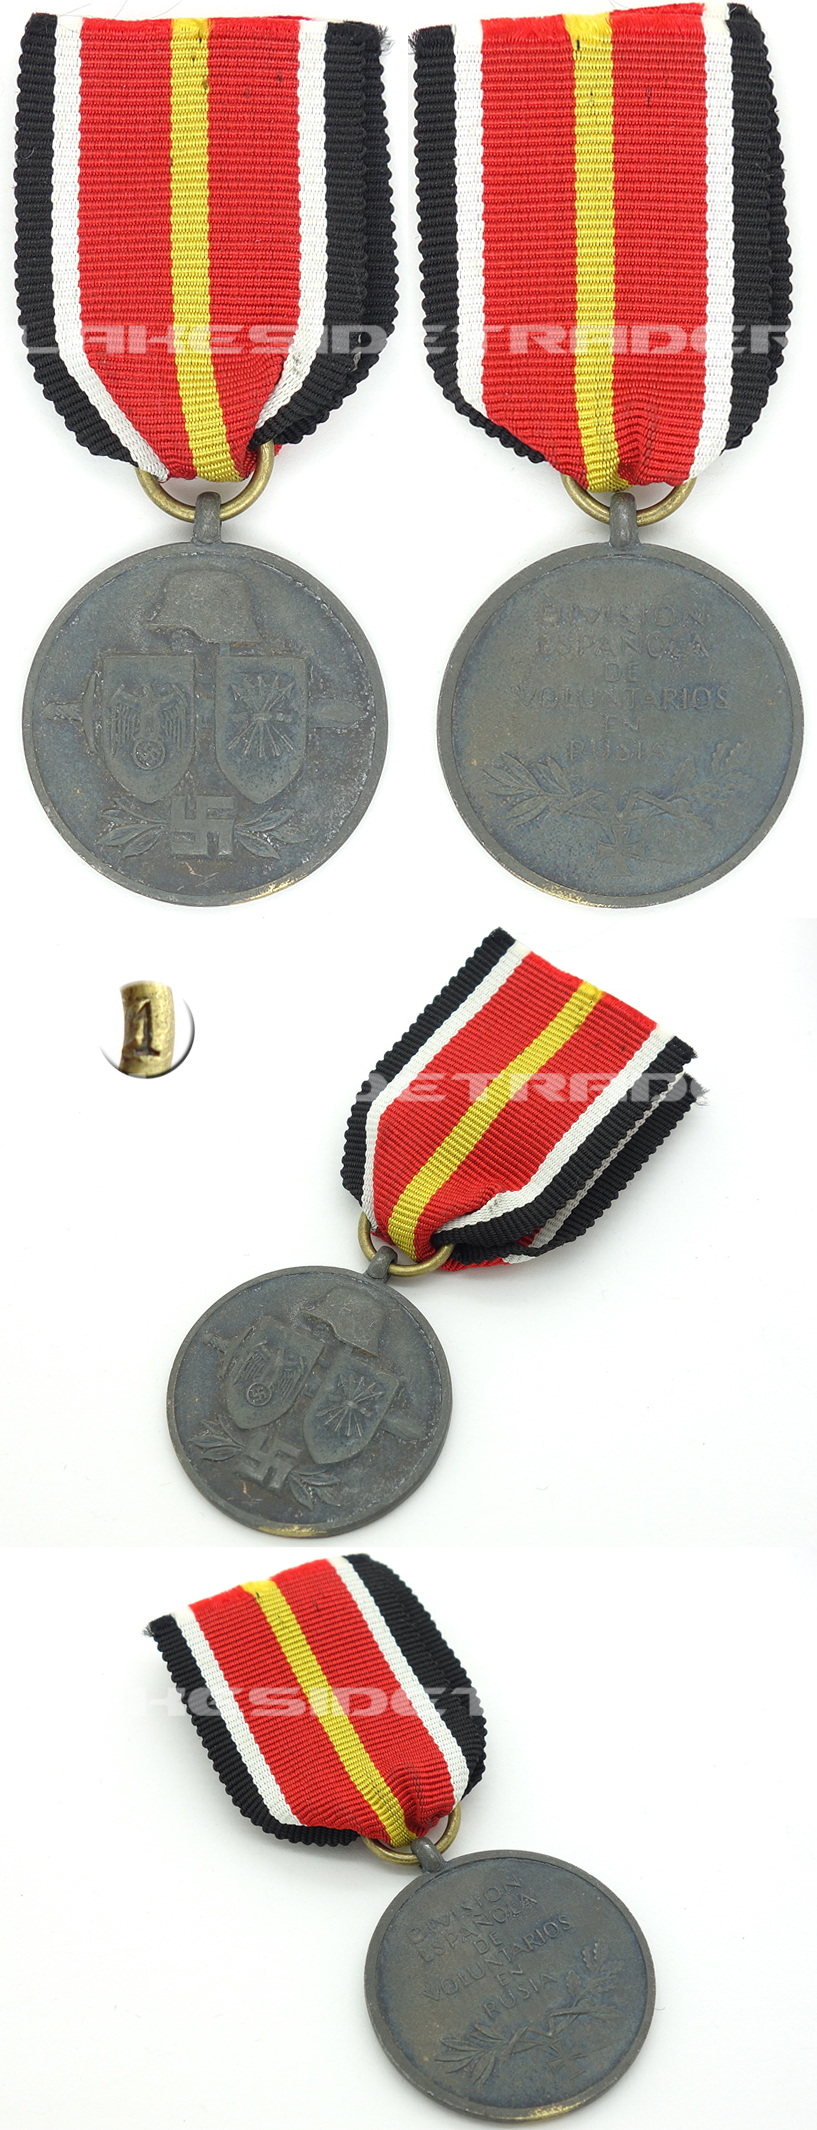 Spanish “Blue Division” Commemorative Medal by 1